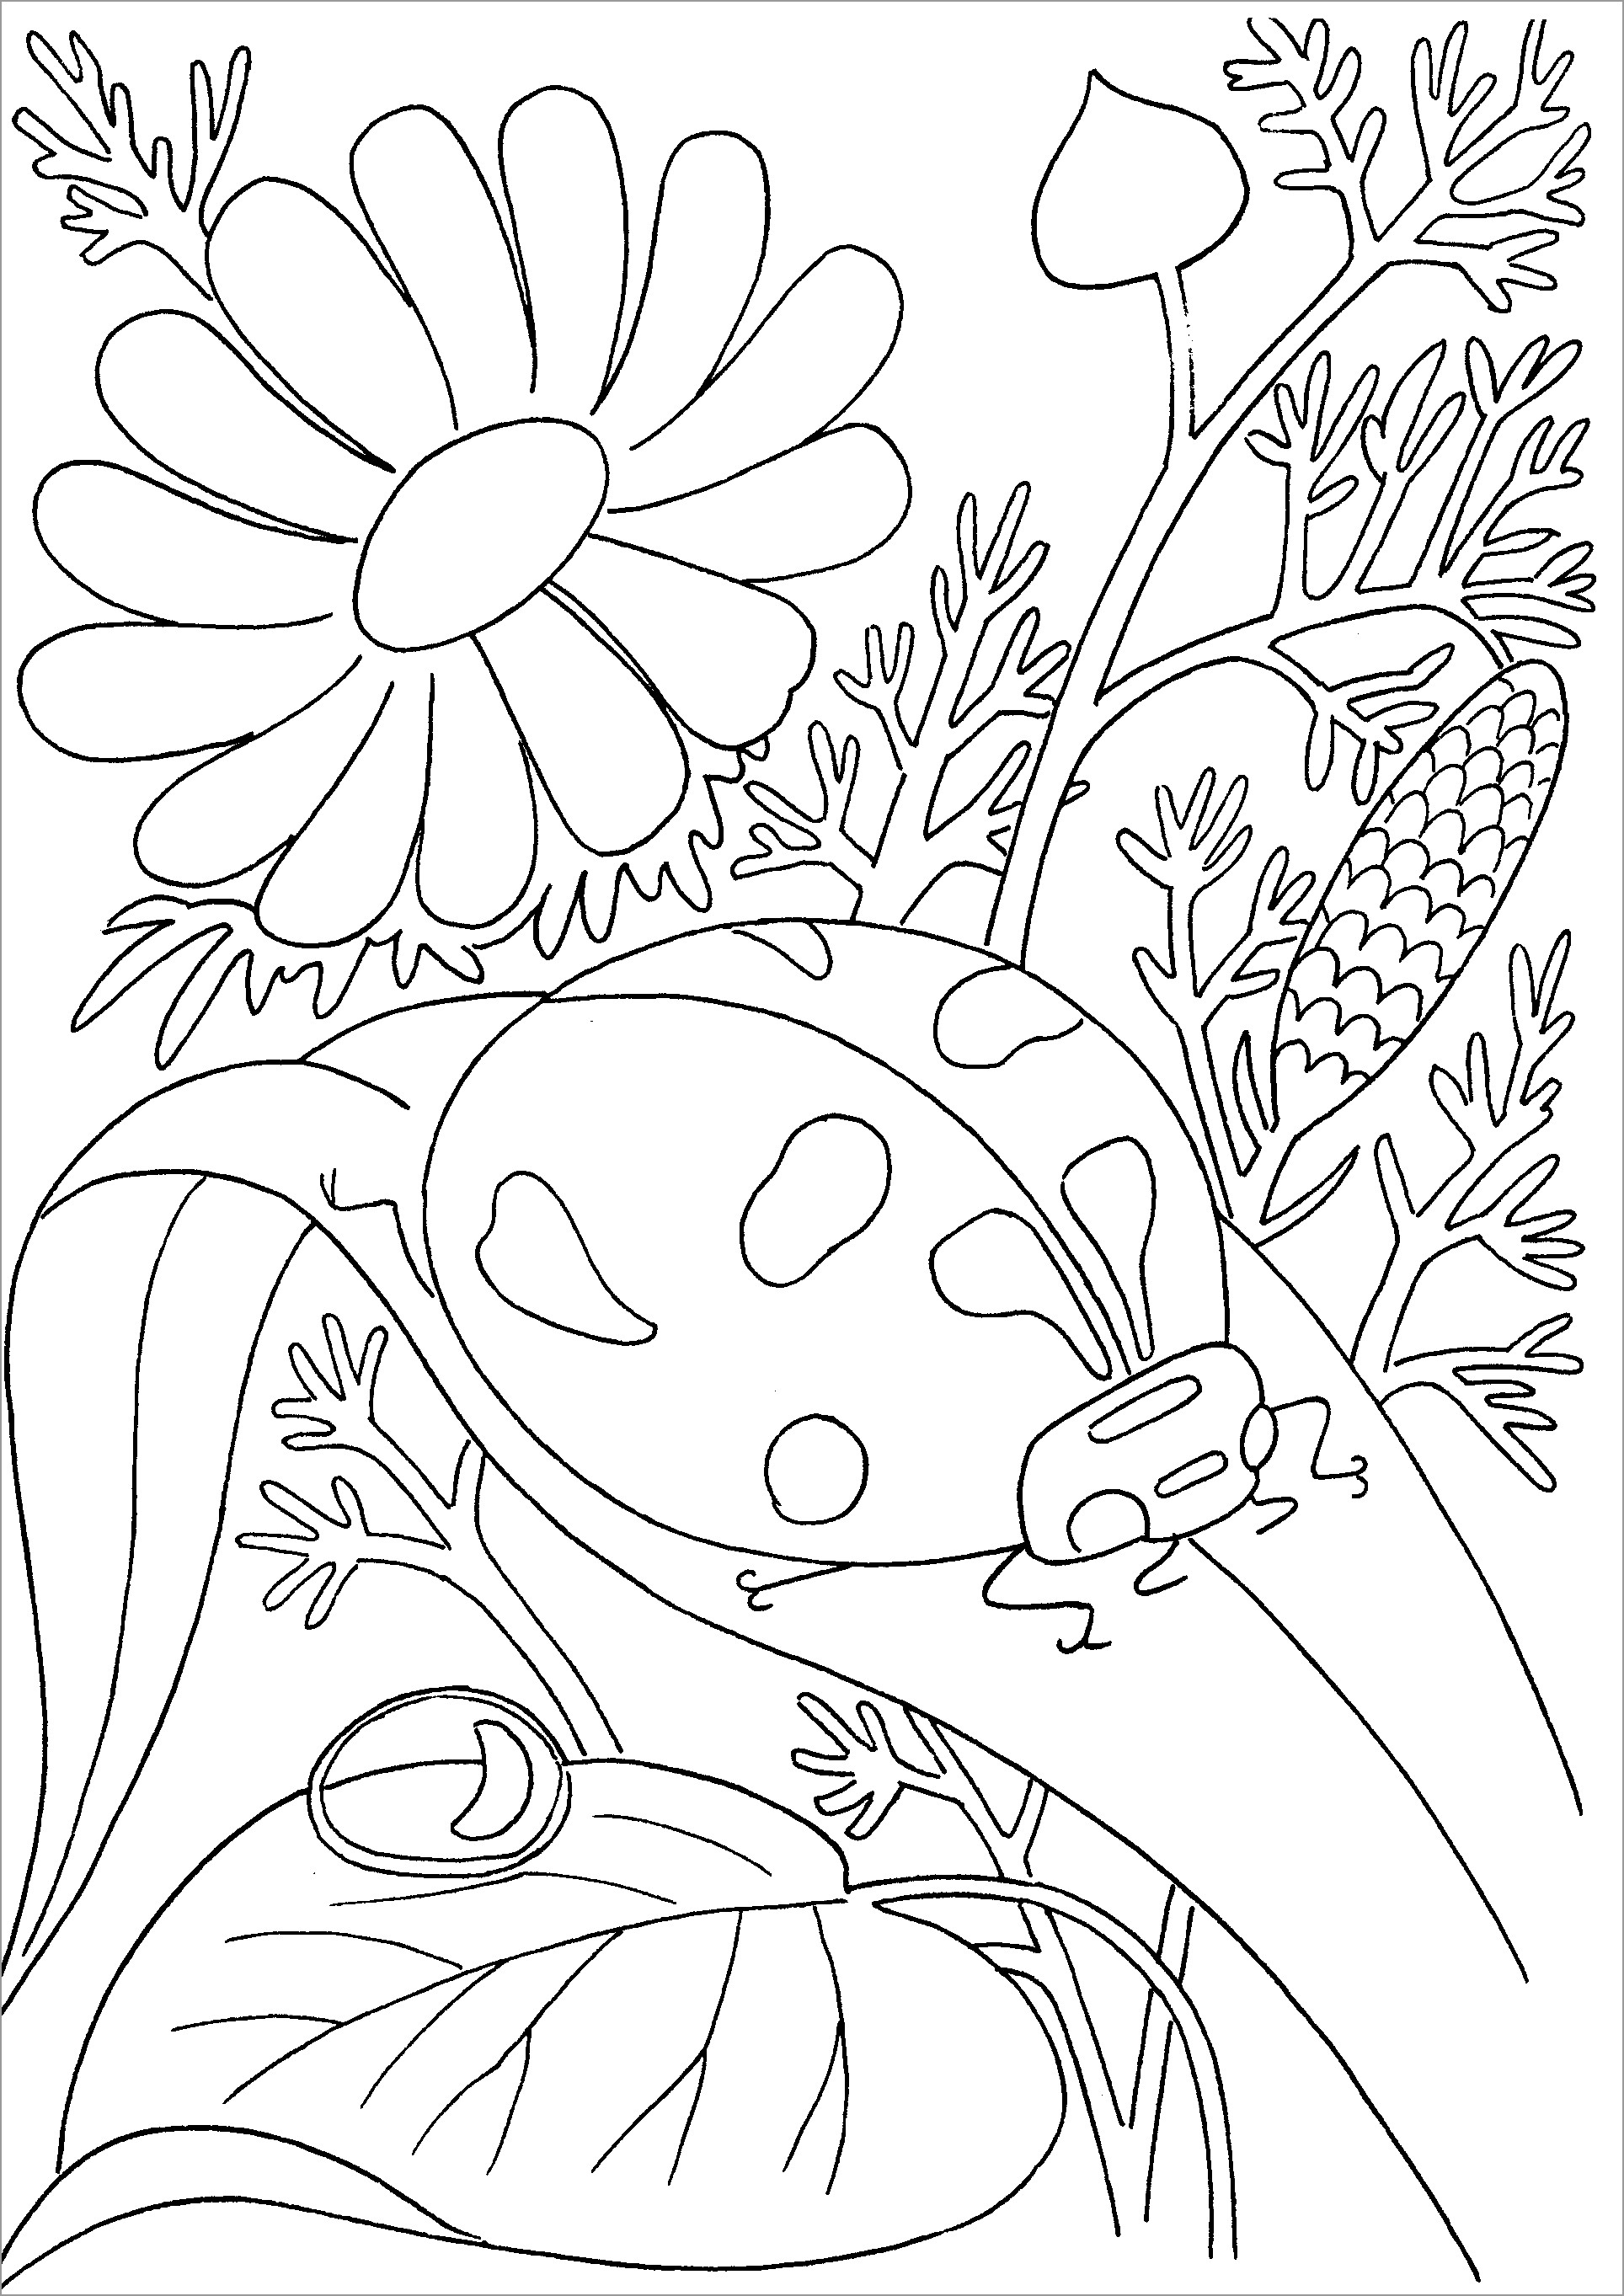 Realistic Insect Coloring Pages